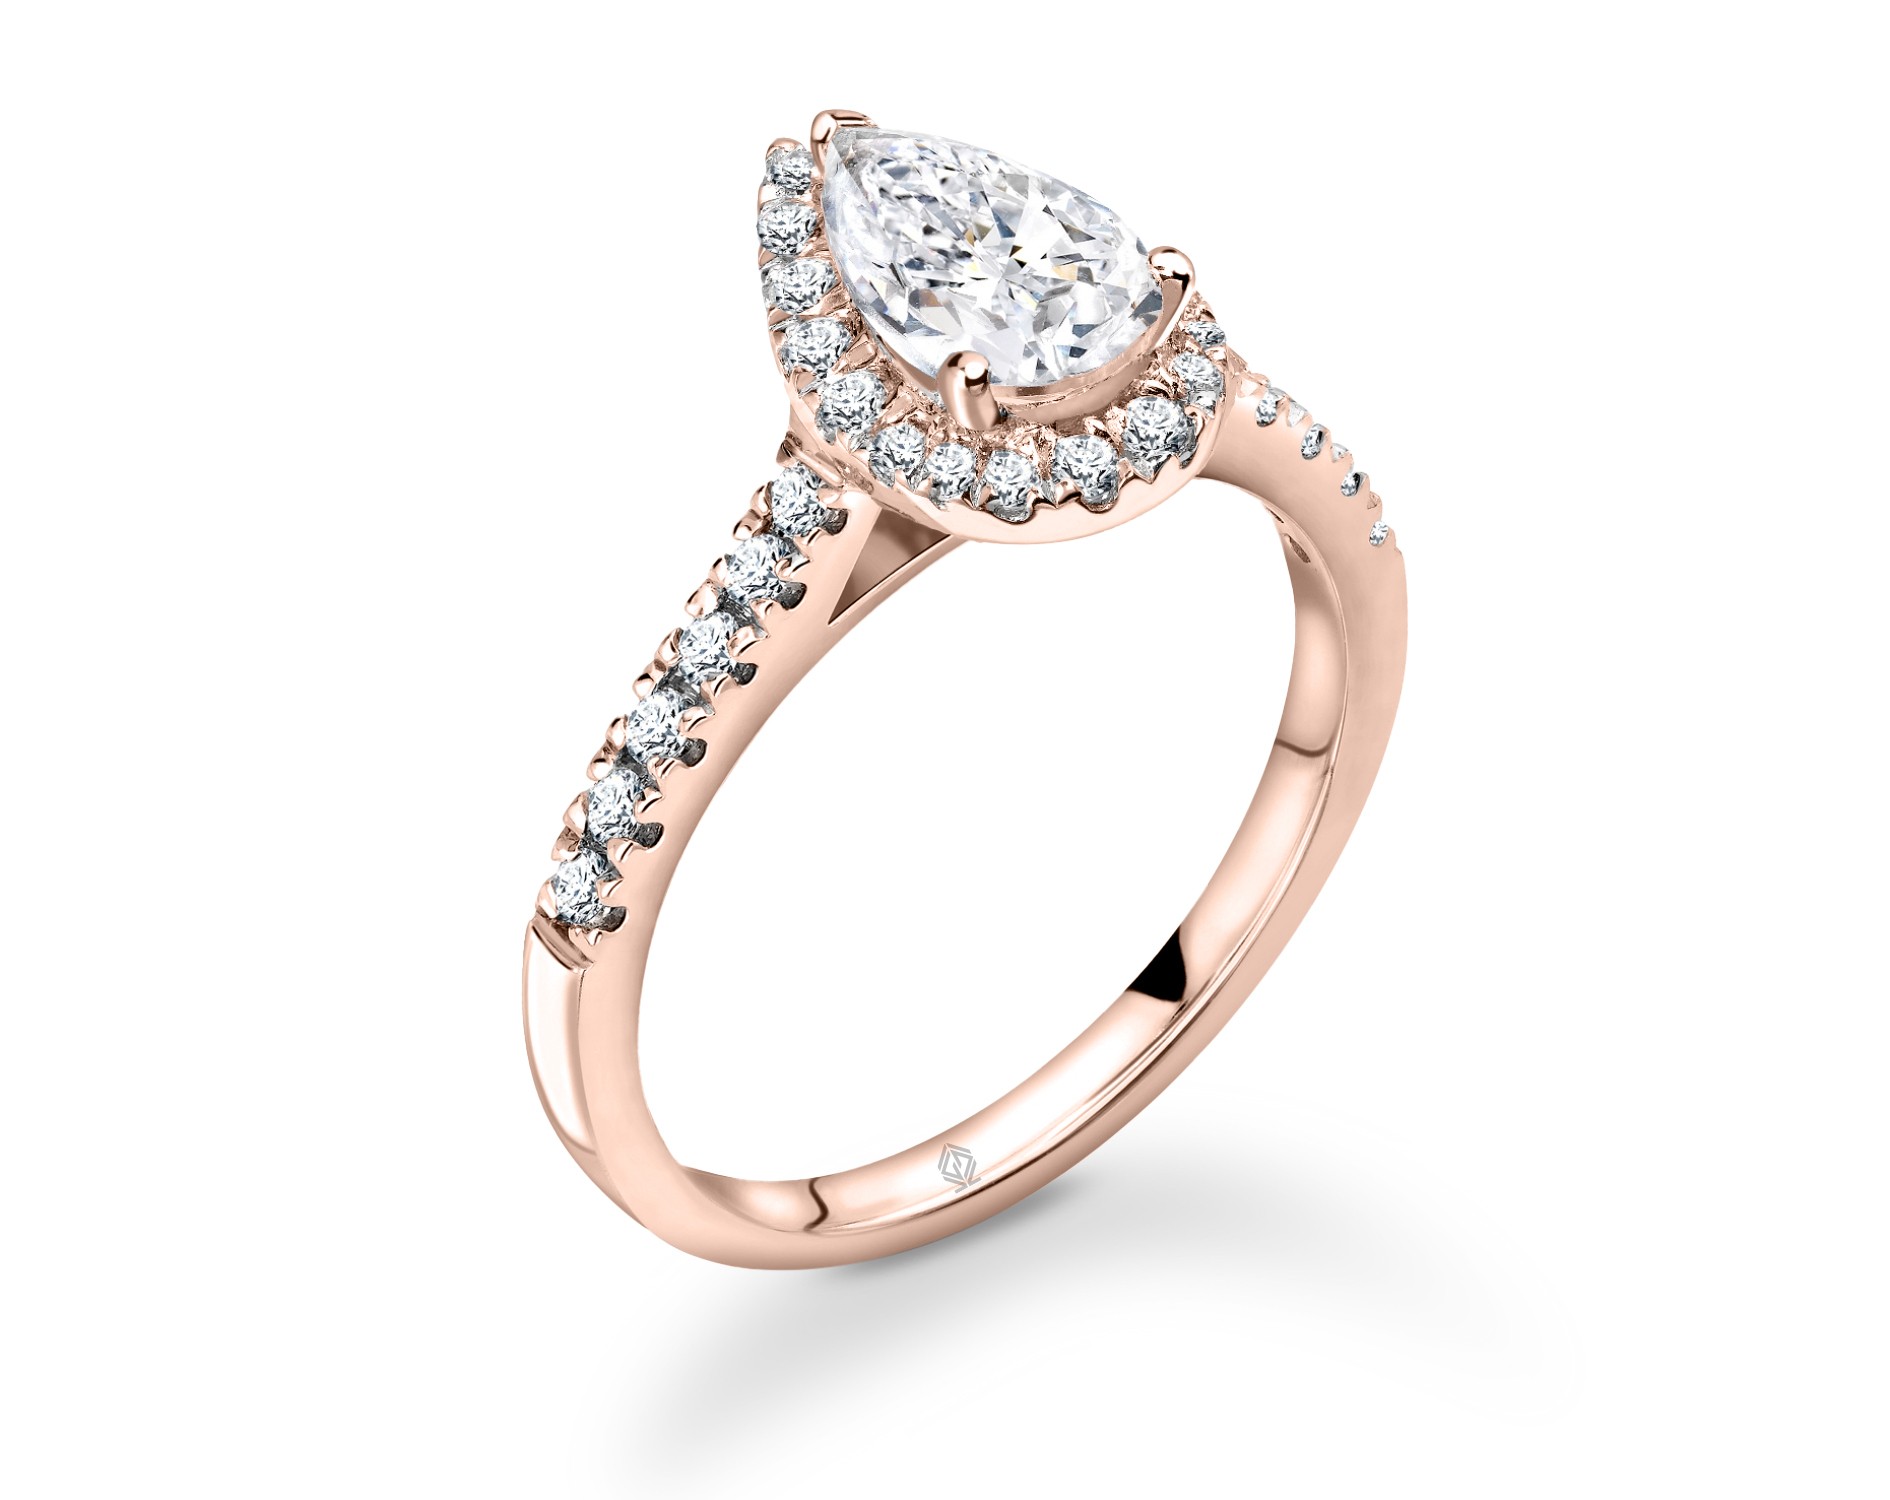 18K ROSE GOLD HALO PEAR CUT DIAMOND ENGAGEMENT RING WITH SIDE STONES PAVE SET